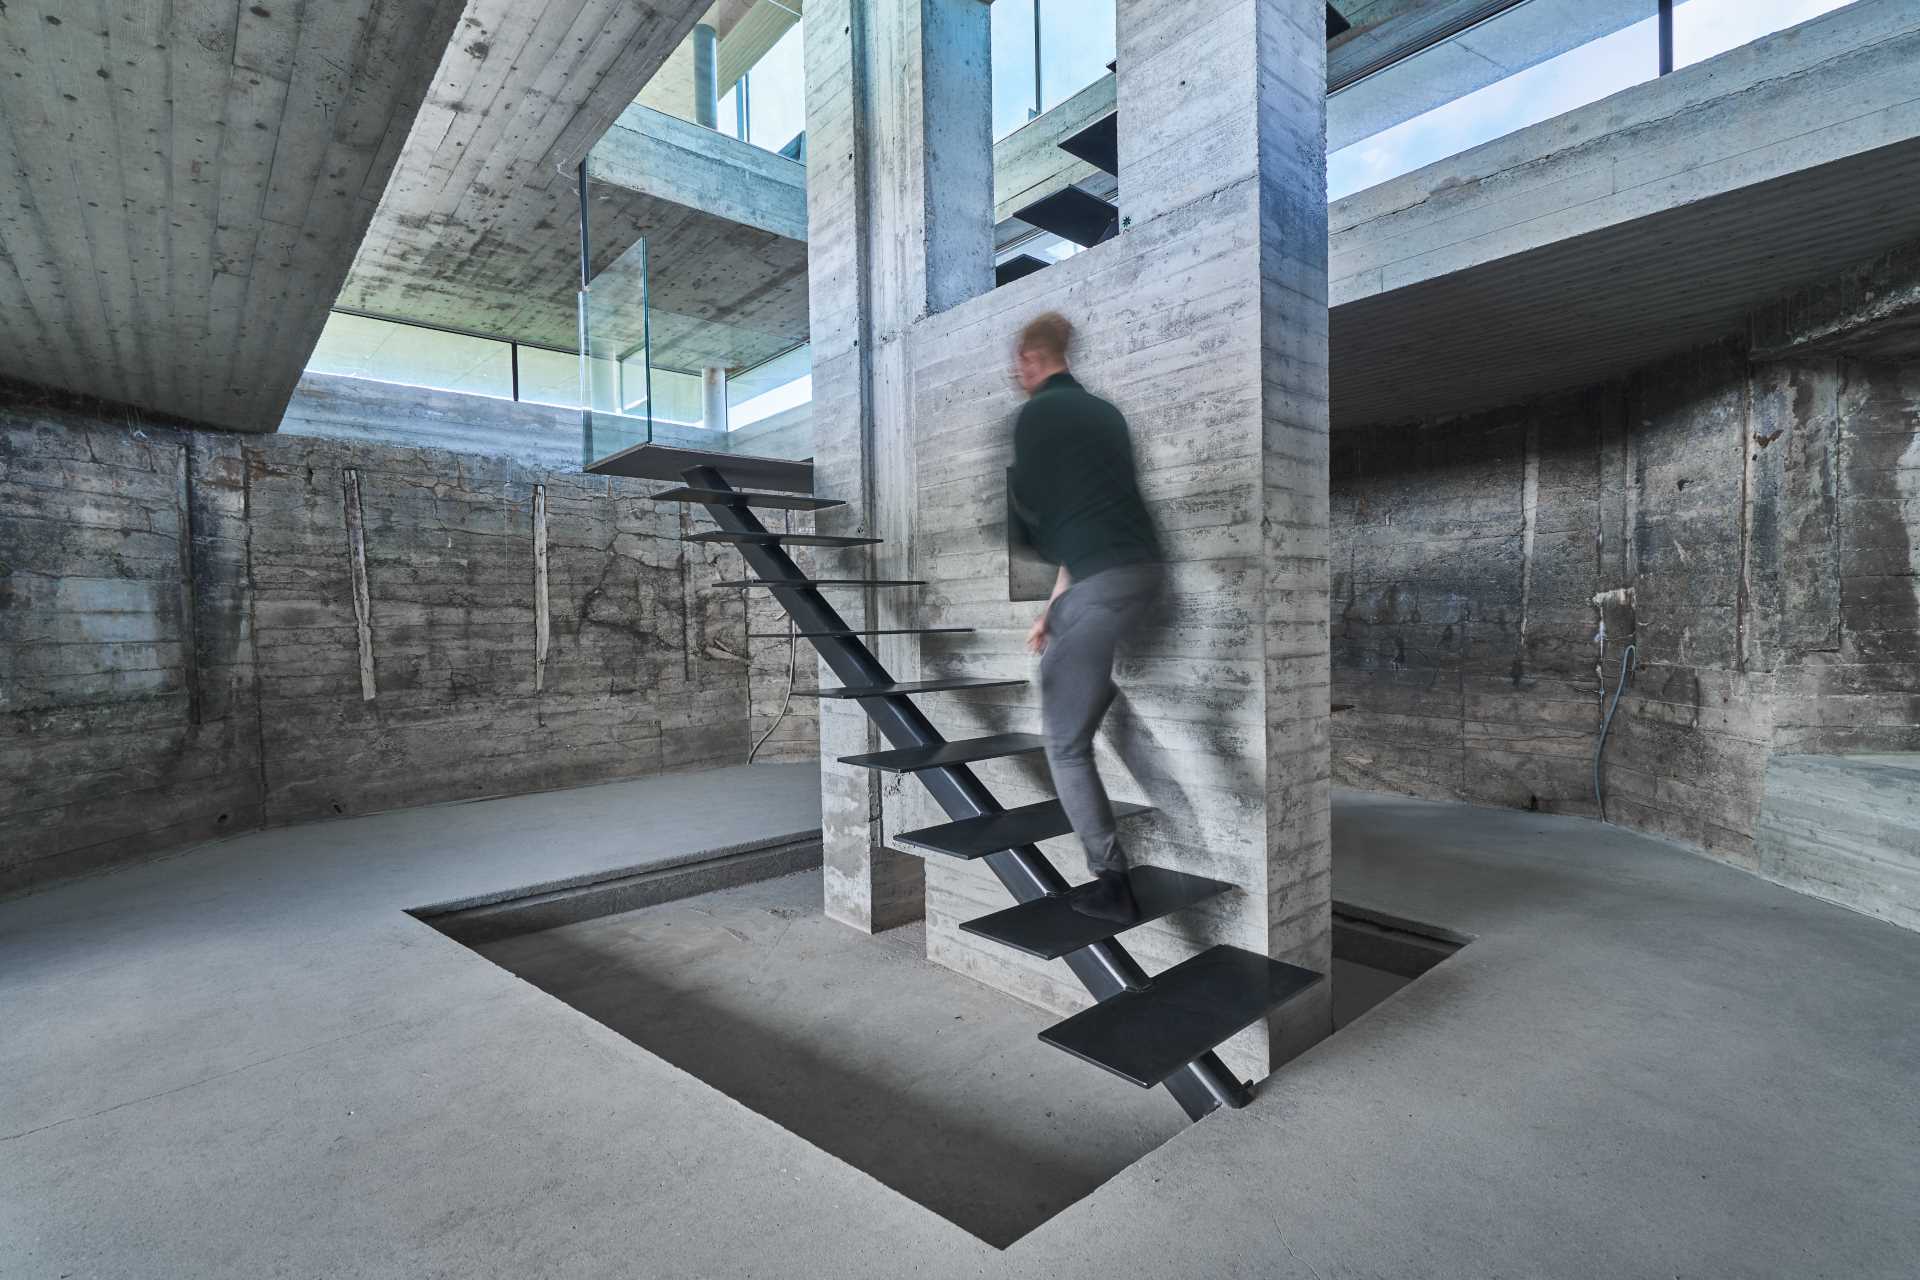 The stairs are put in as a central and sculptural element, leading from the closed parts of the bunker and up to the light of the event space.